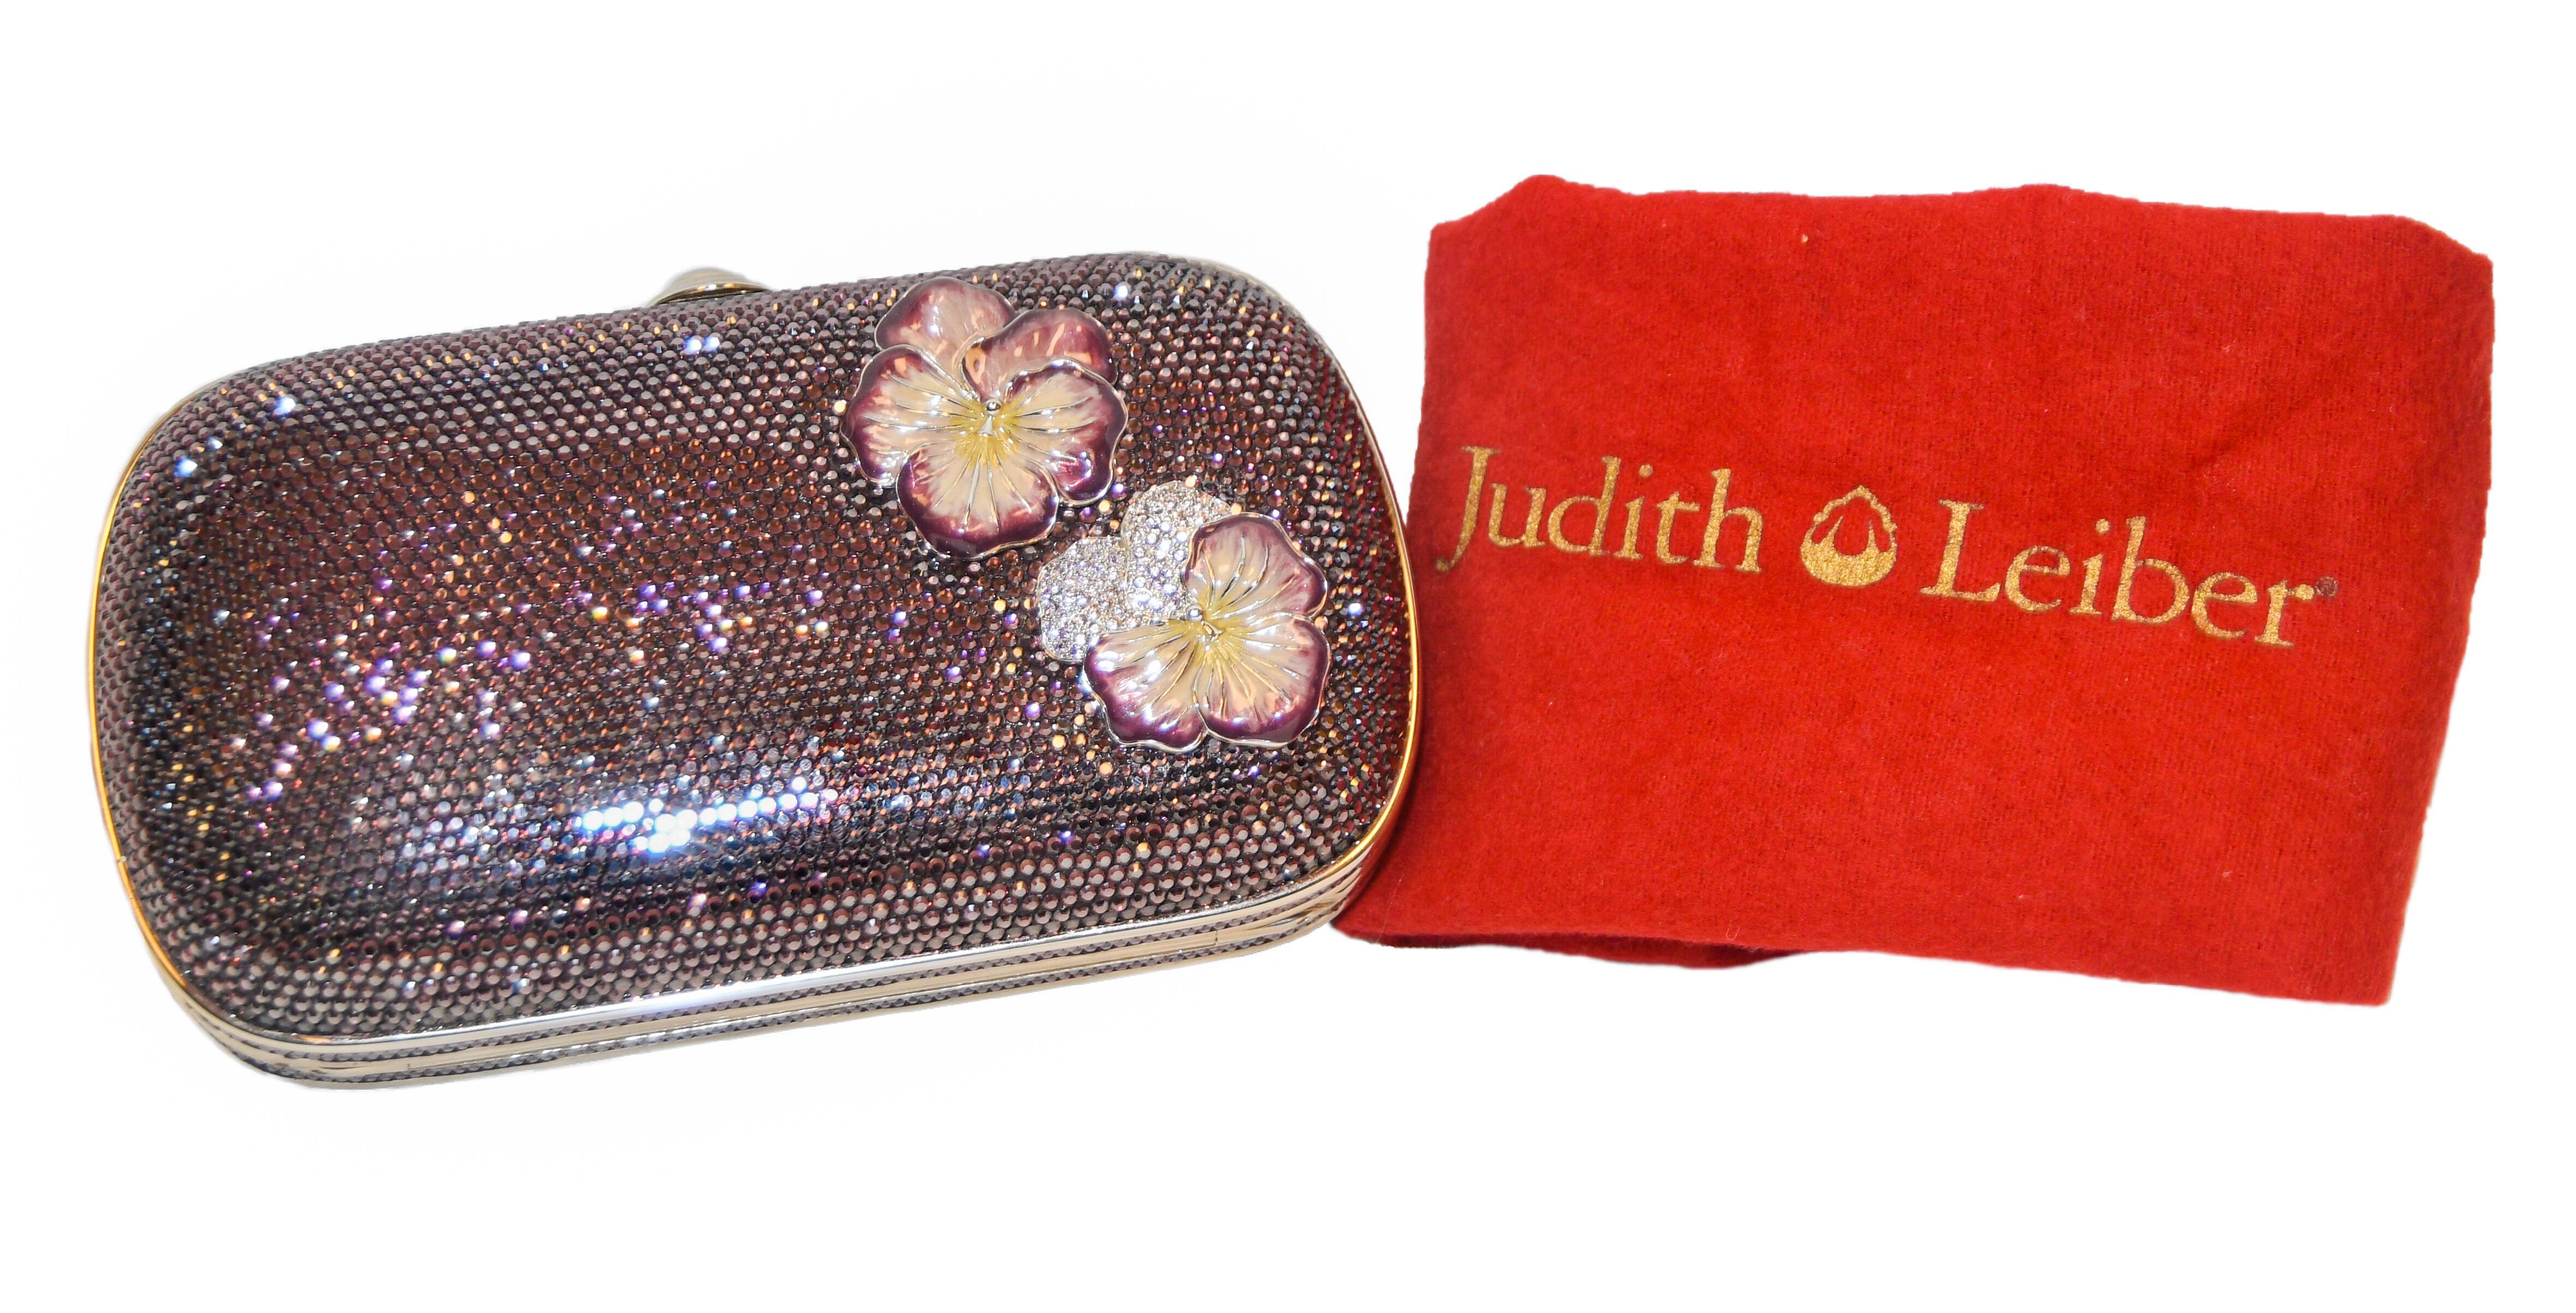 Judith Leiber purple crystal minaudiere evening clutch enhanced with 2 unique enamel Pansy flowers at front corner.  Purple Swarovski crystal exterior trimmed with silver hardware and a top push button closure. Silver leather lined interior that